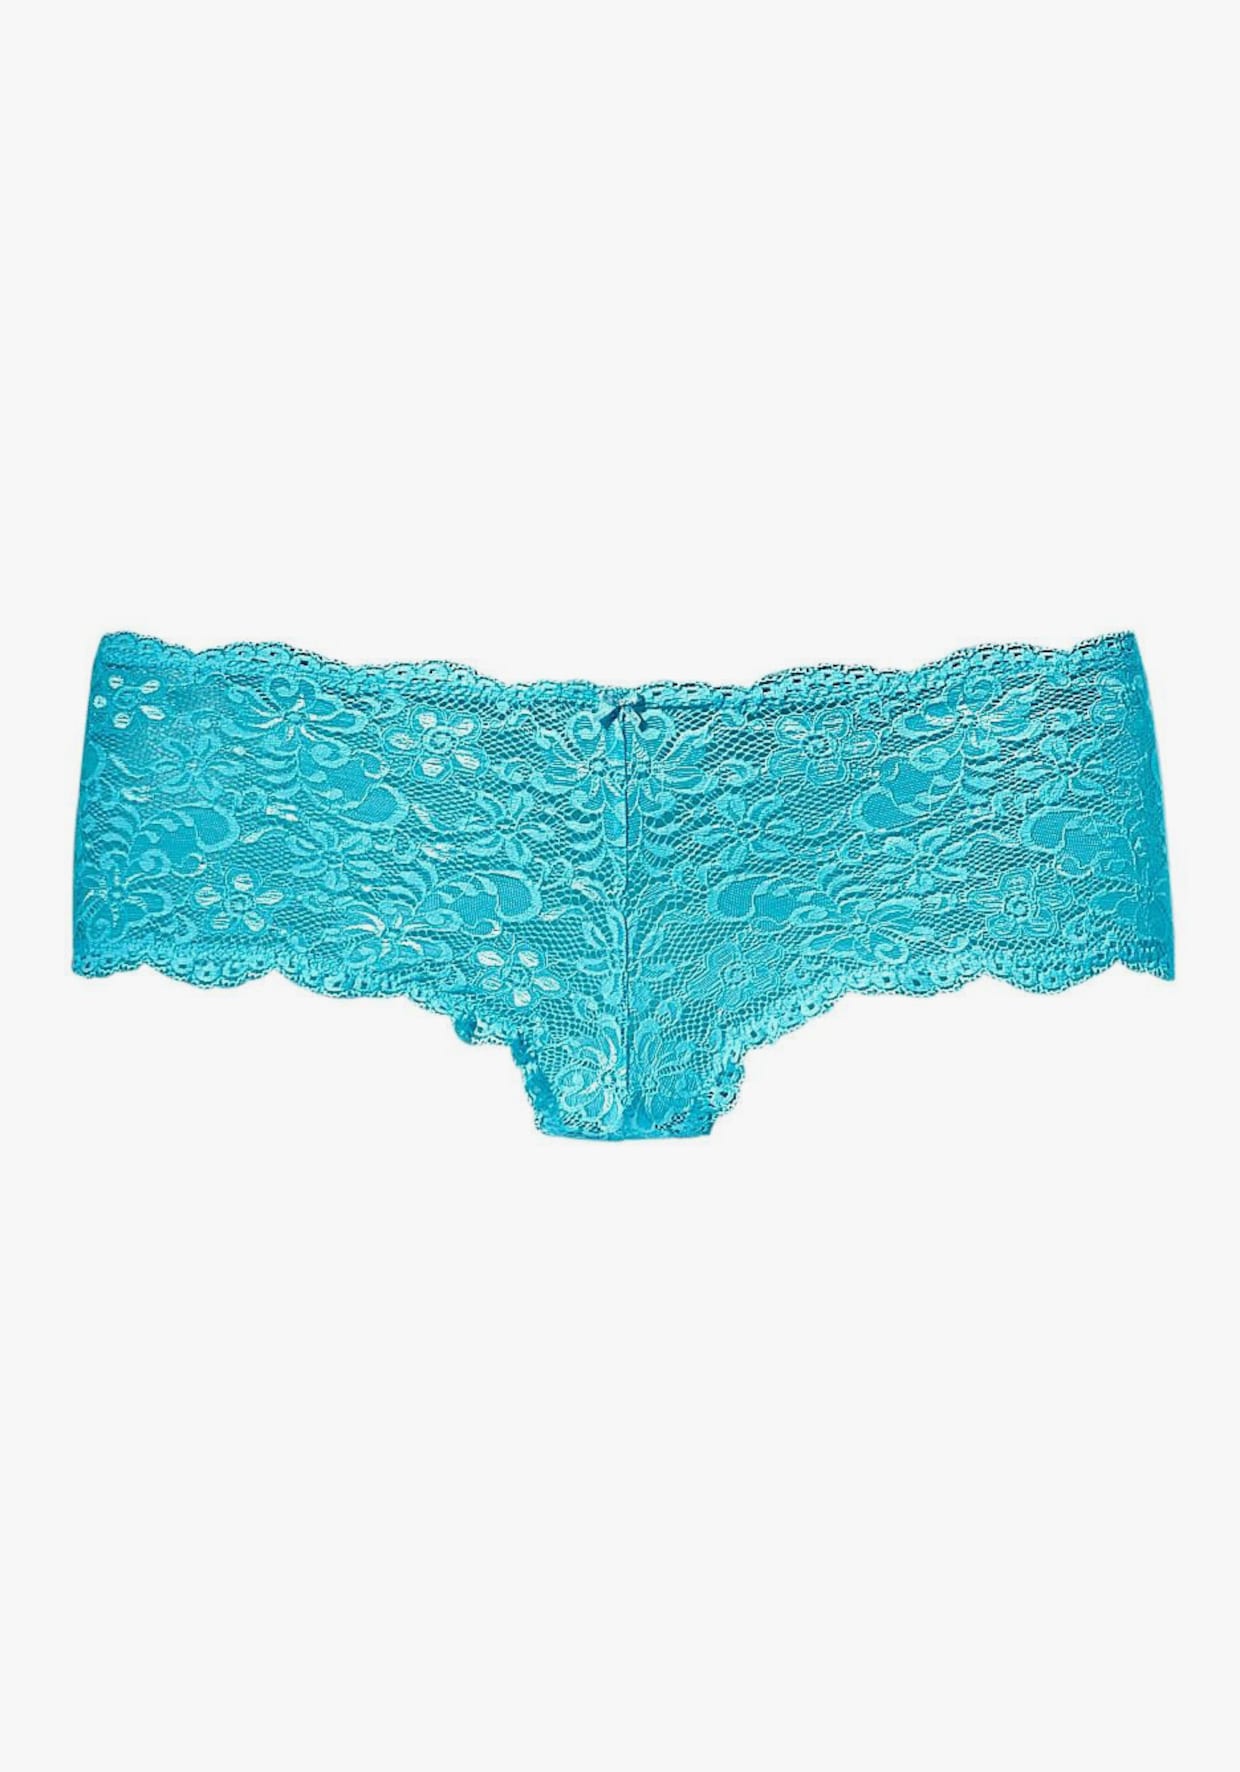 Nuance Panty - turquoise